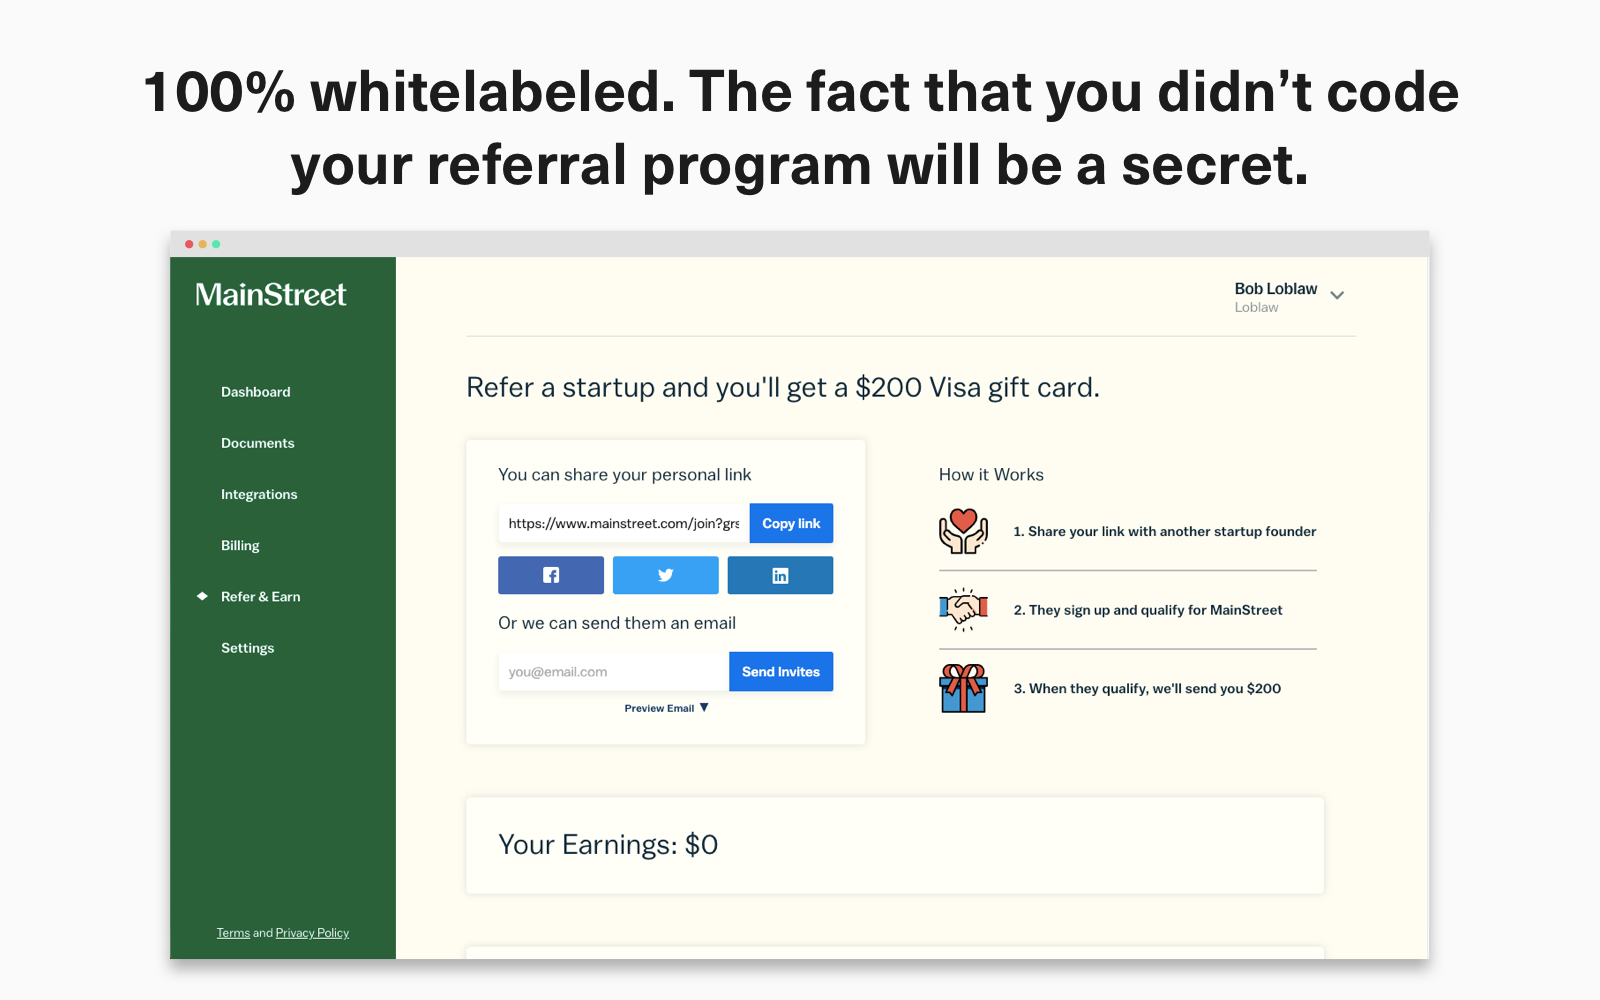 100% whitelabeled. The fact that you didn't code your referral program will be a secret.